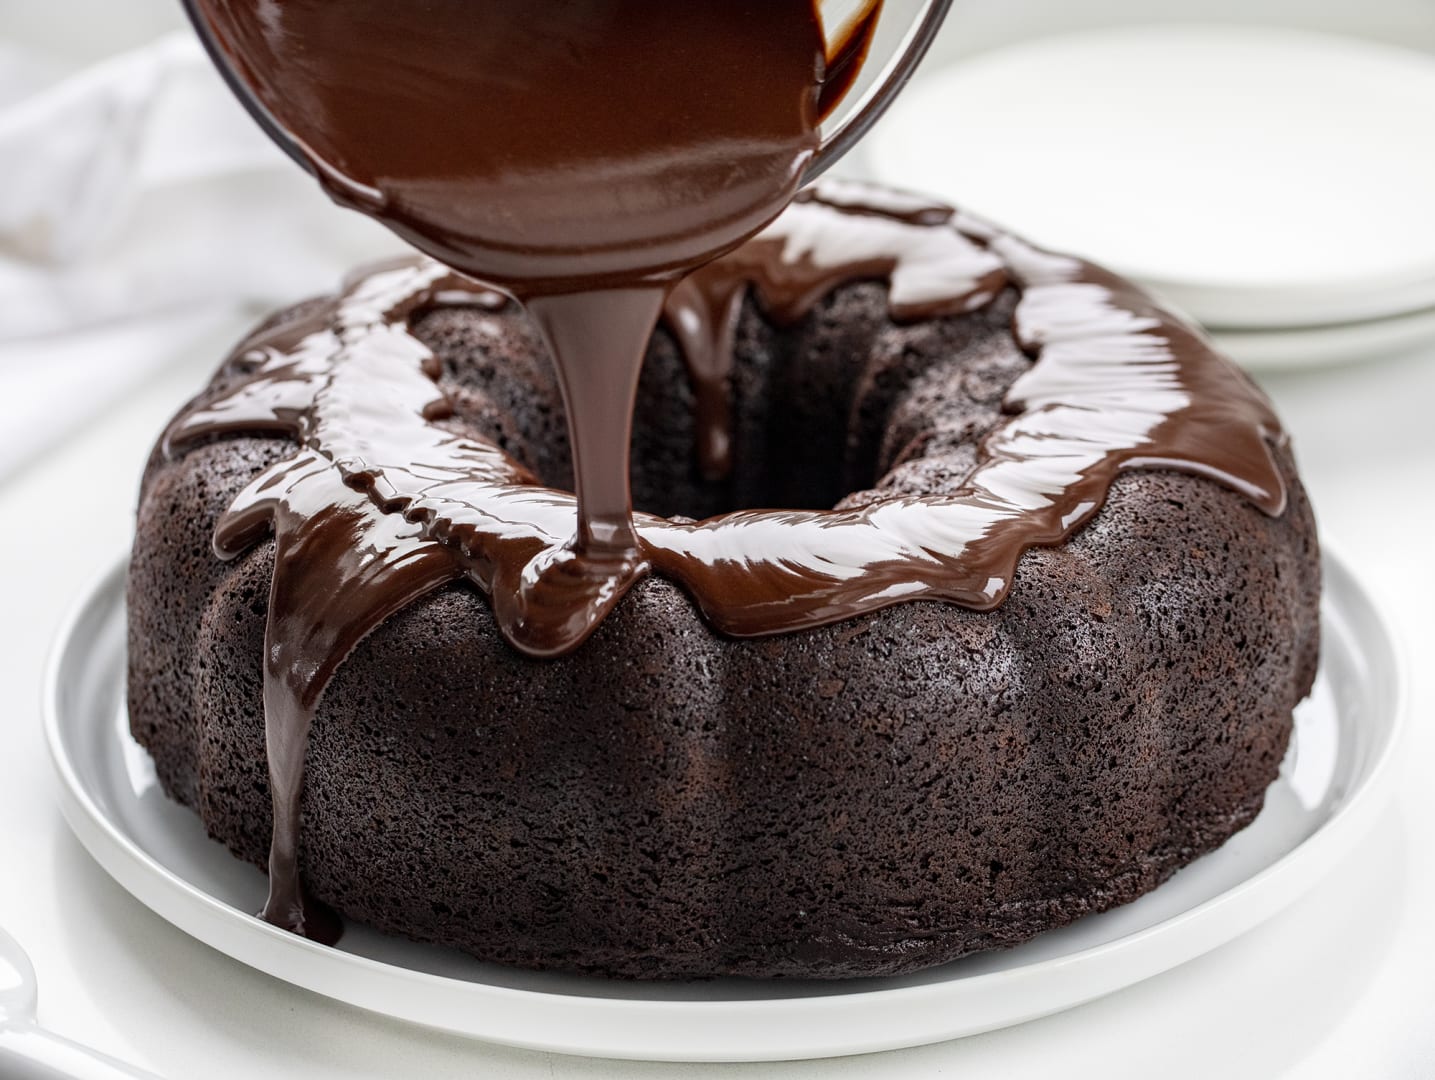 can a bundt cake be reconstructed to look like a normal cylindrical cake :  r/Baking